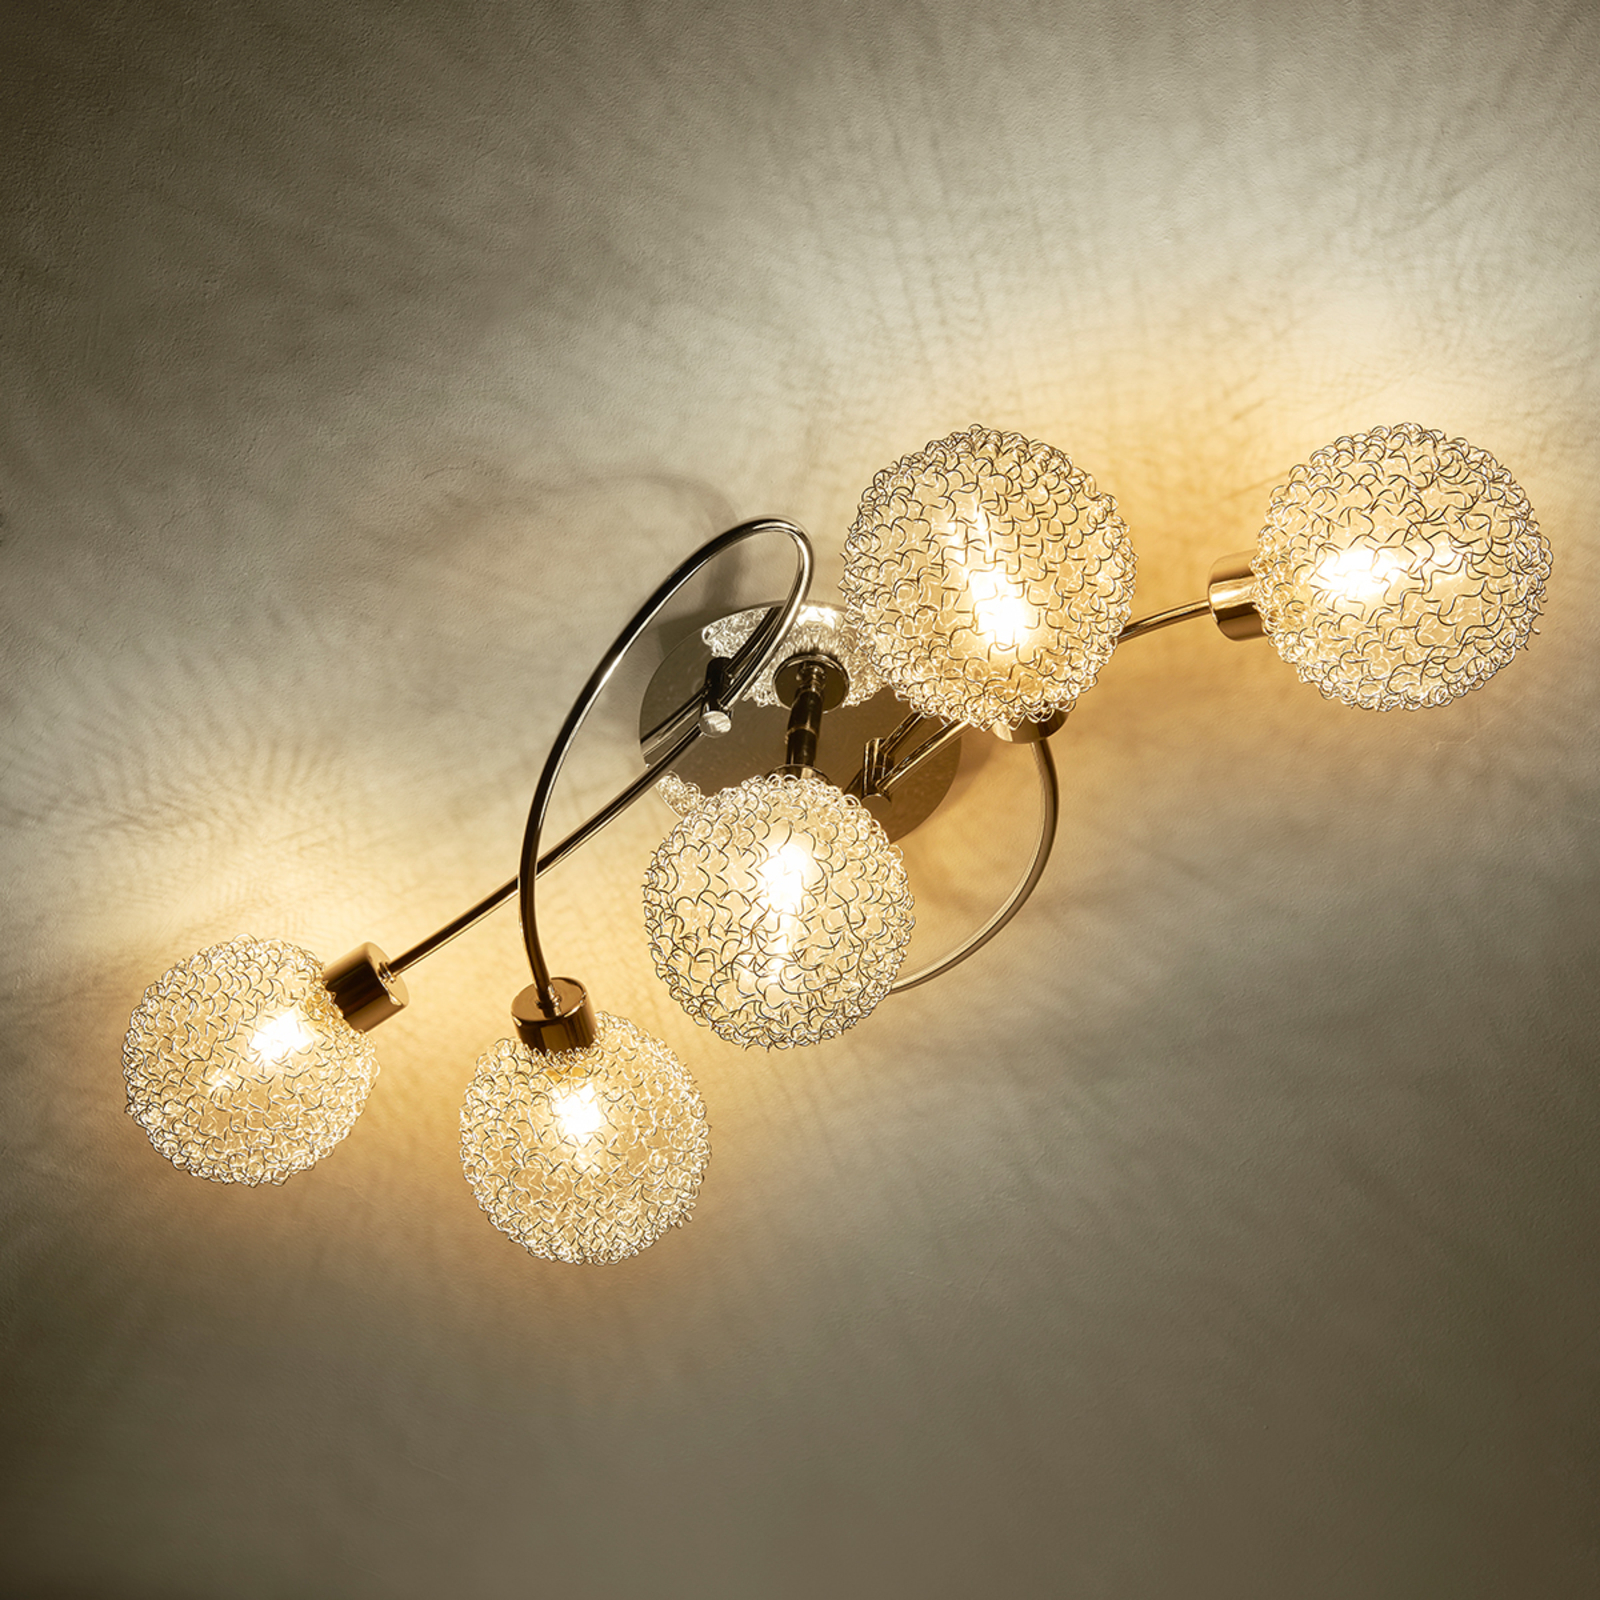 LED ceiling lamp Ticino in a playful style